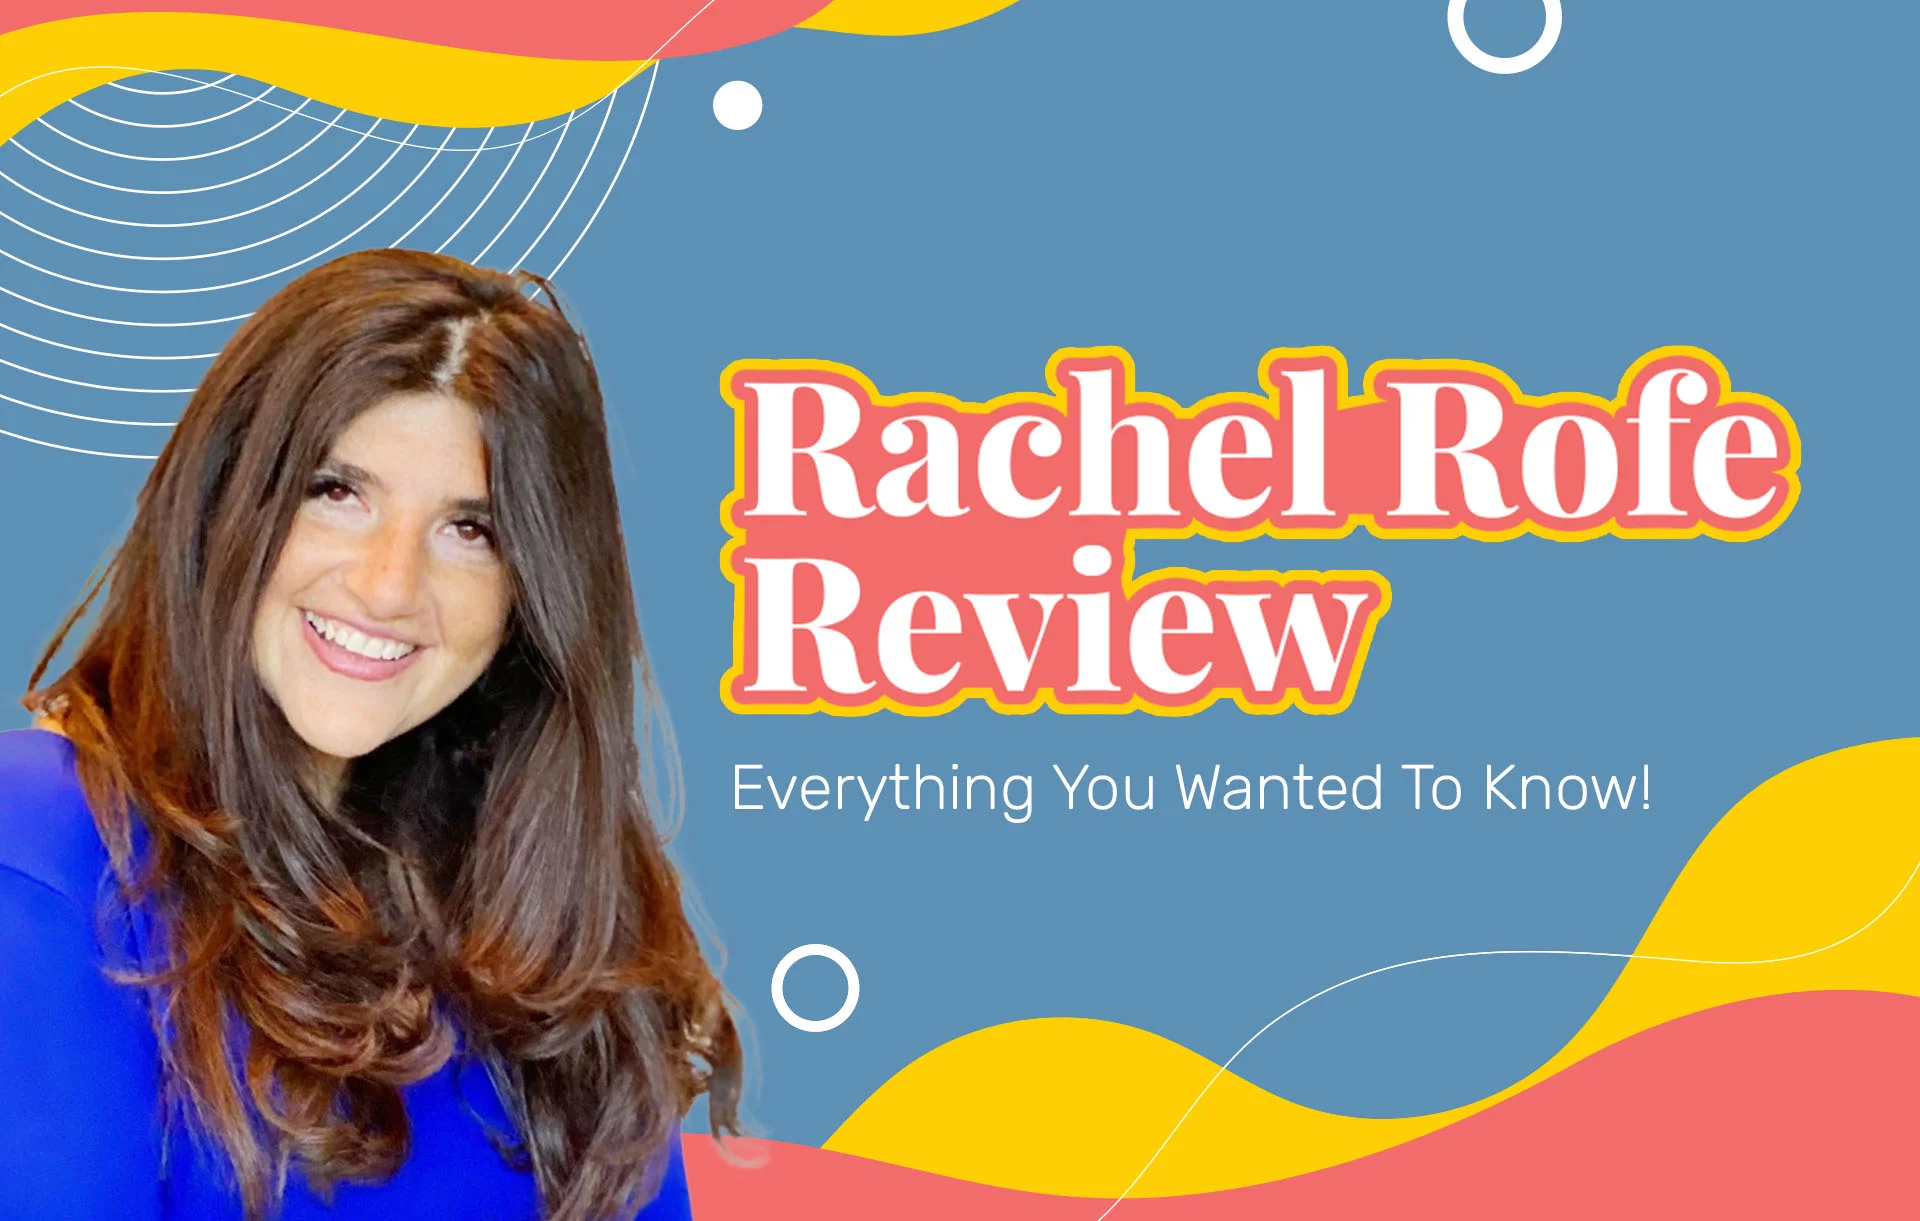 Rachel Rofe Reviews: Everything You Wanted To Know!